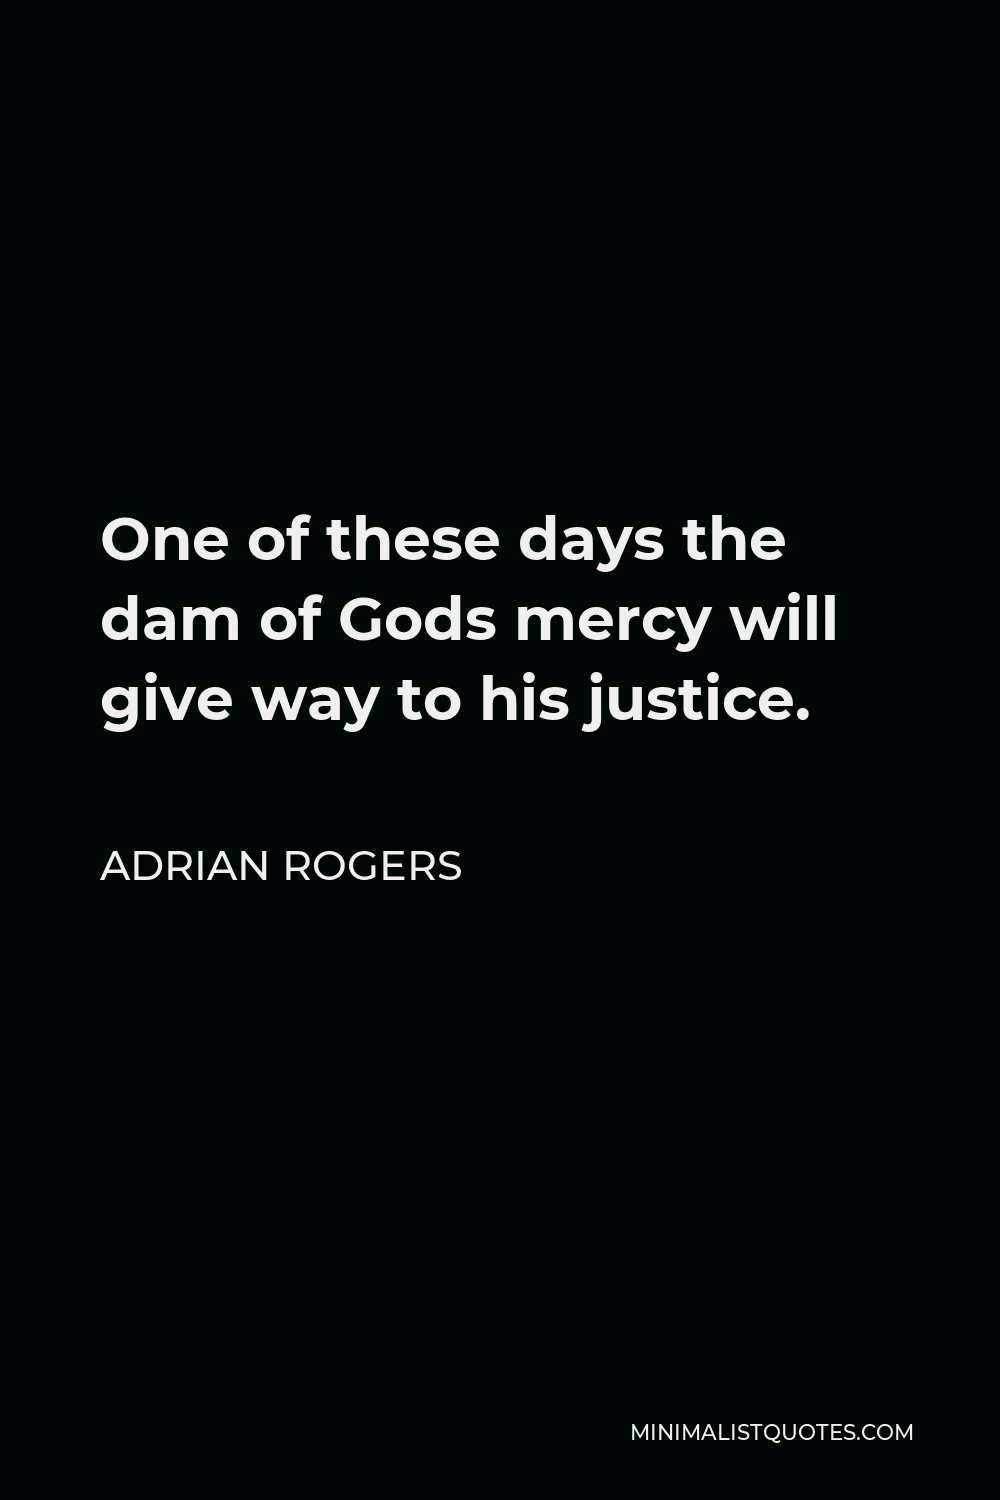 Adrian Rogers Quote - One of these days the dam of Gods mercy will give way to his justice.